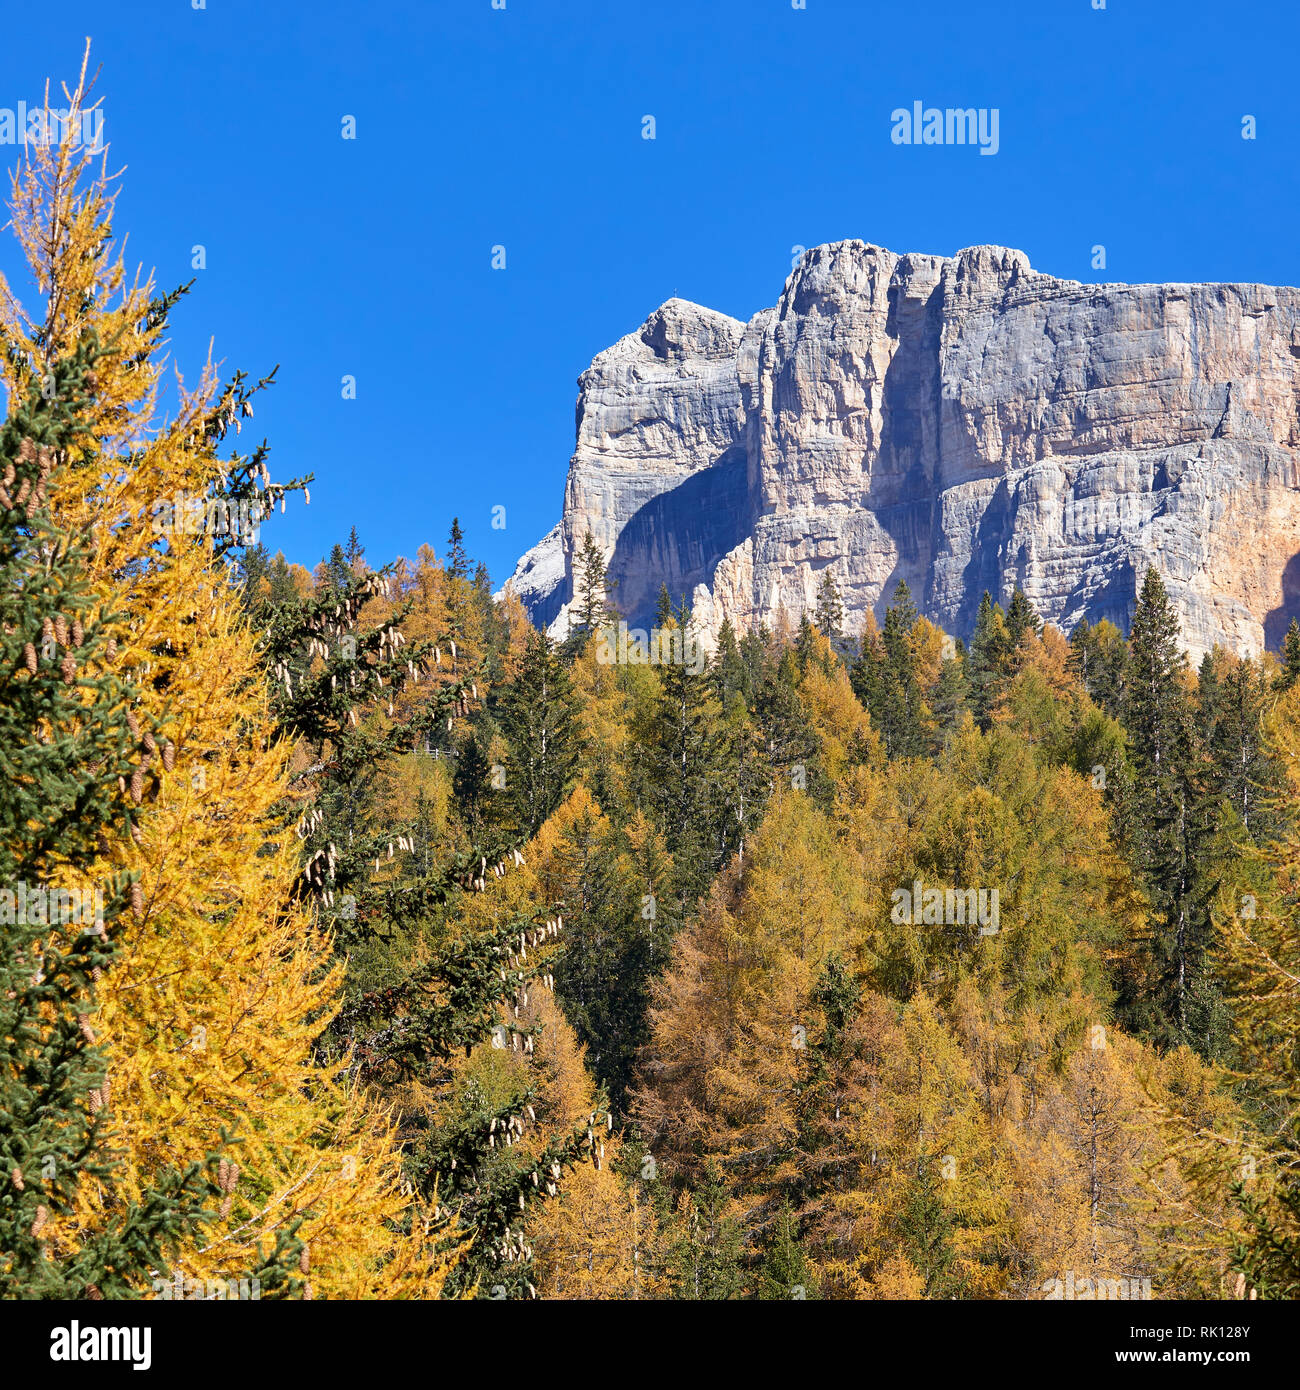 The cliffs of Sasso della Croce above forest in autumn, Val Badia, Dolomites, Alta Badia, South Tyrol, Italy Stock Photo